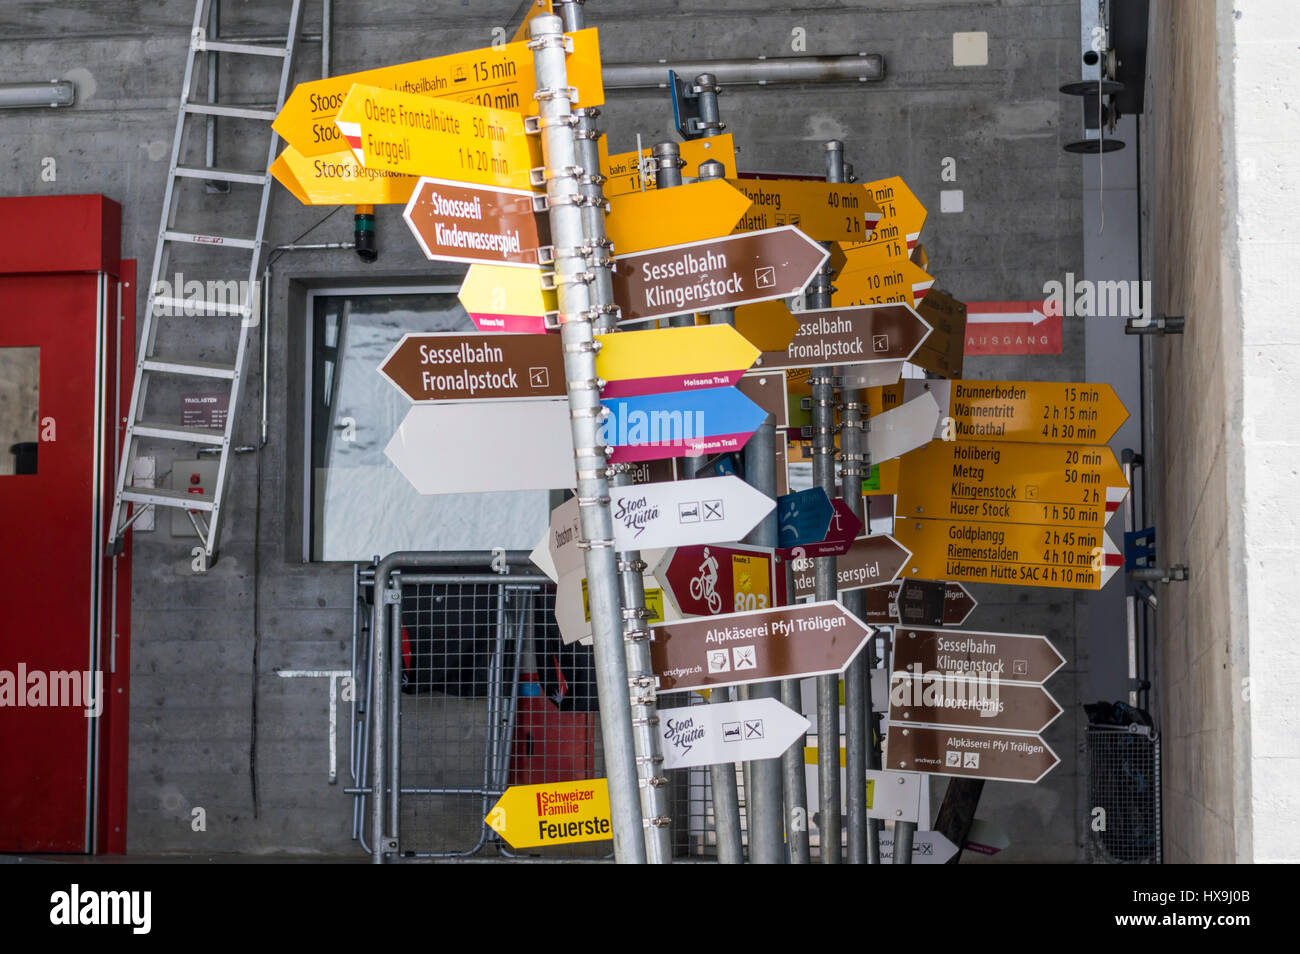 Many Swiss hiking signposts with overlapping signs stored for later reuse. Stock Photo